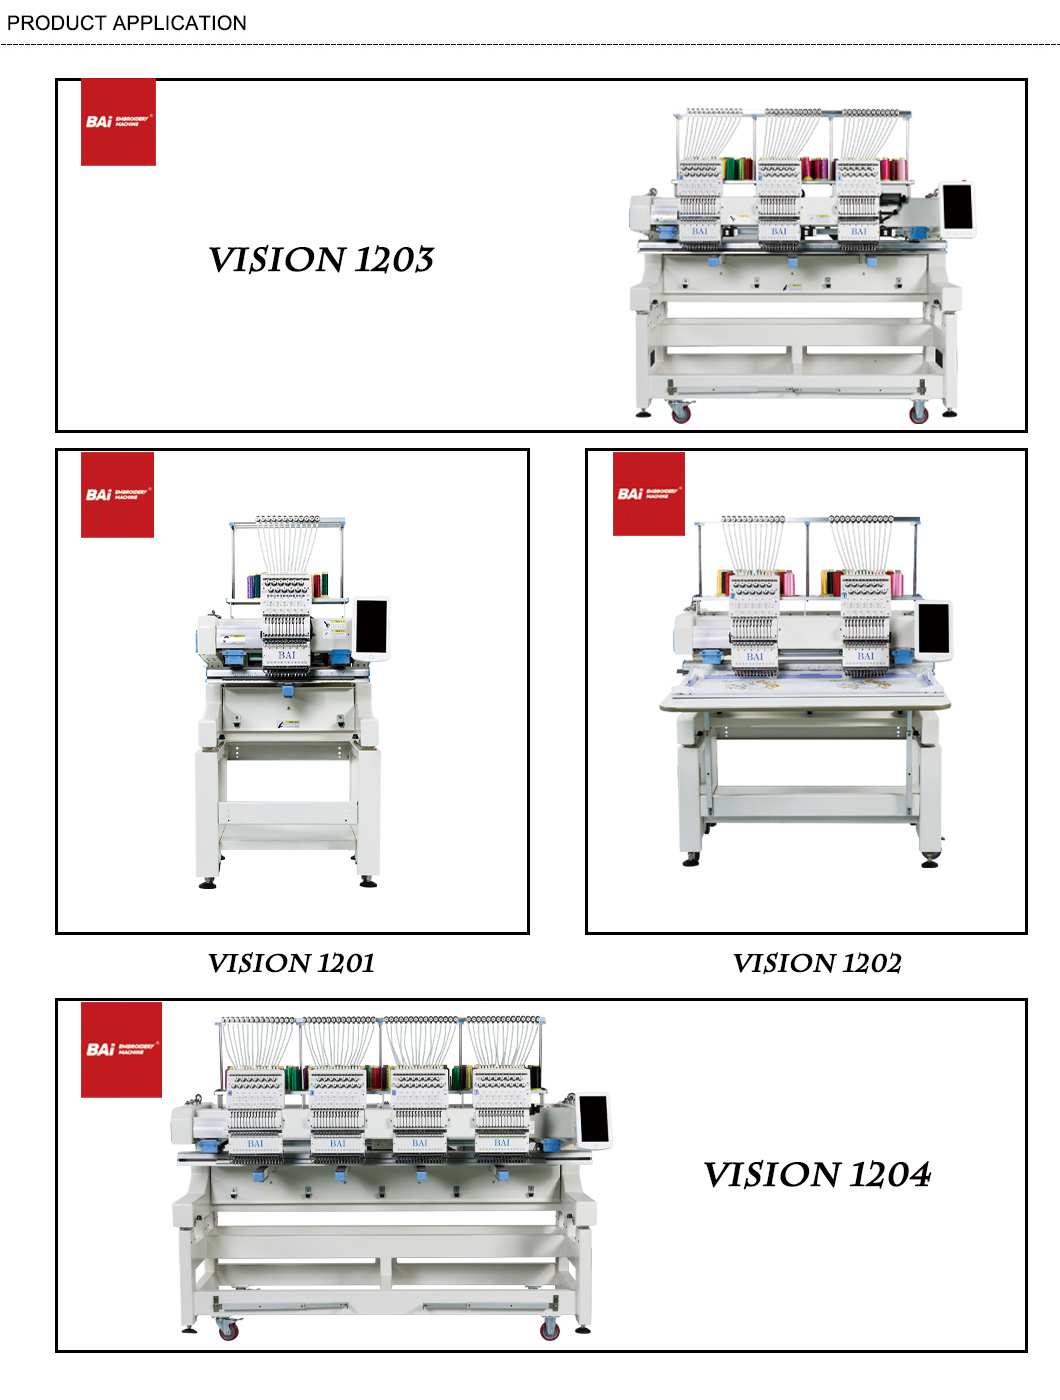 Bai Computer Controlled Embroidery Machines for Machine Embroidery Designs